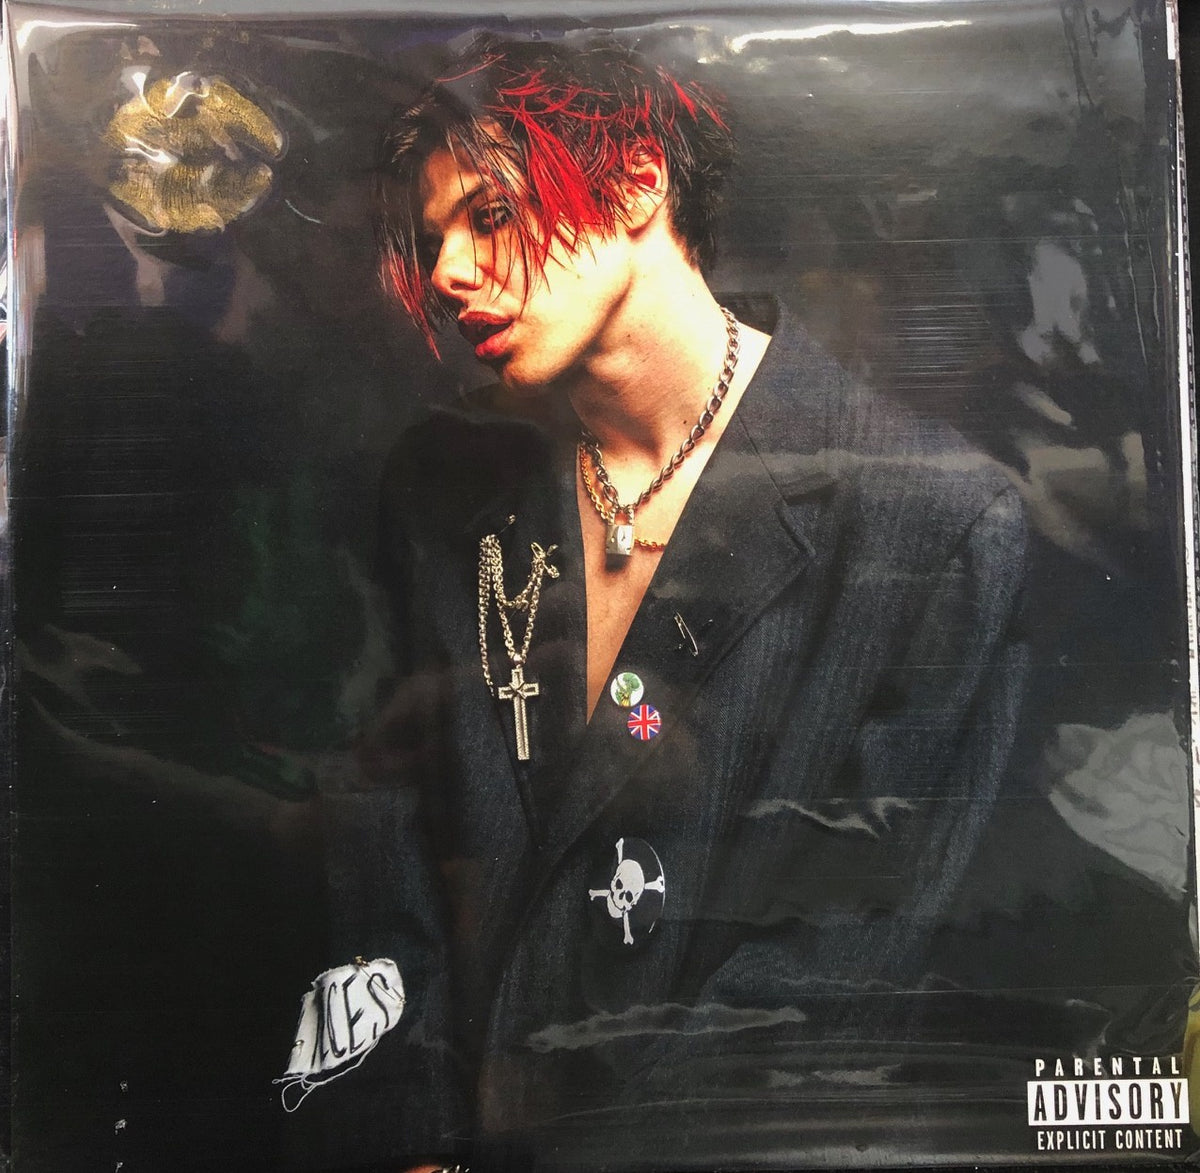 YUNGBLUD Signed Deluxe Transparent Vinyl – YUNGBLUD Official Store